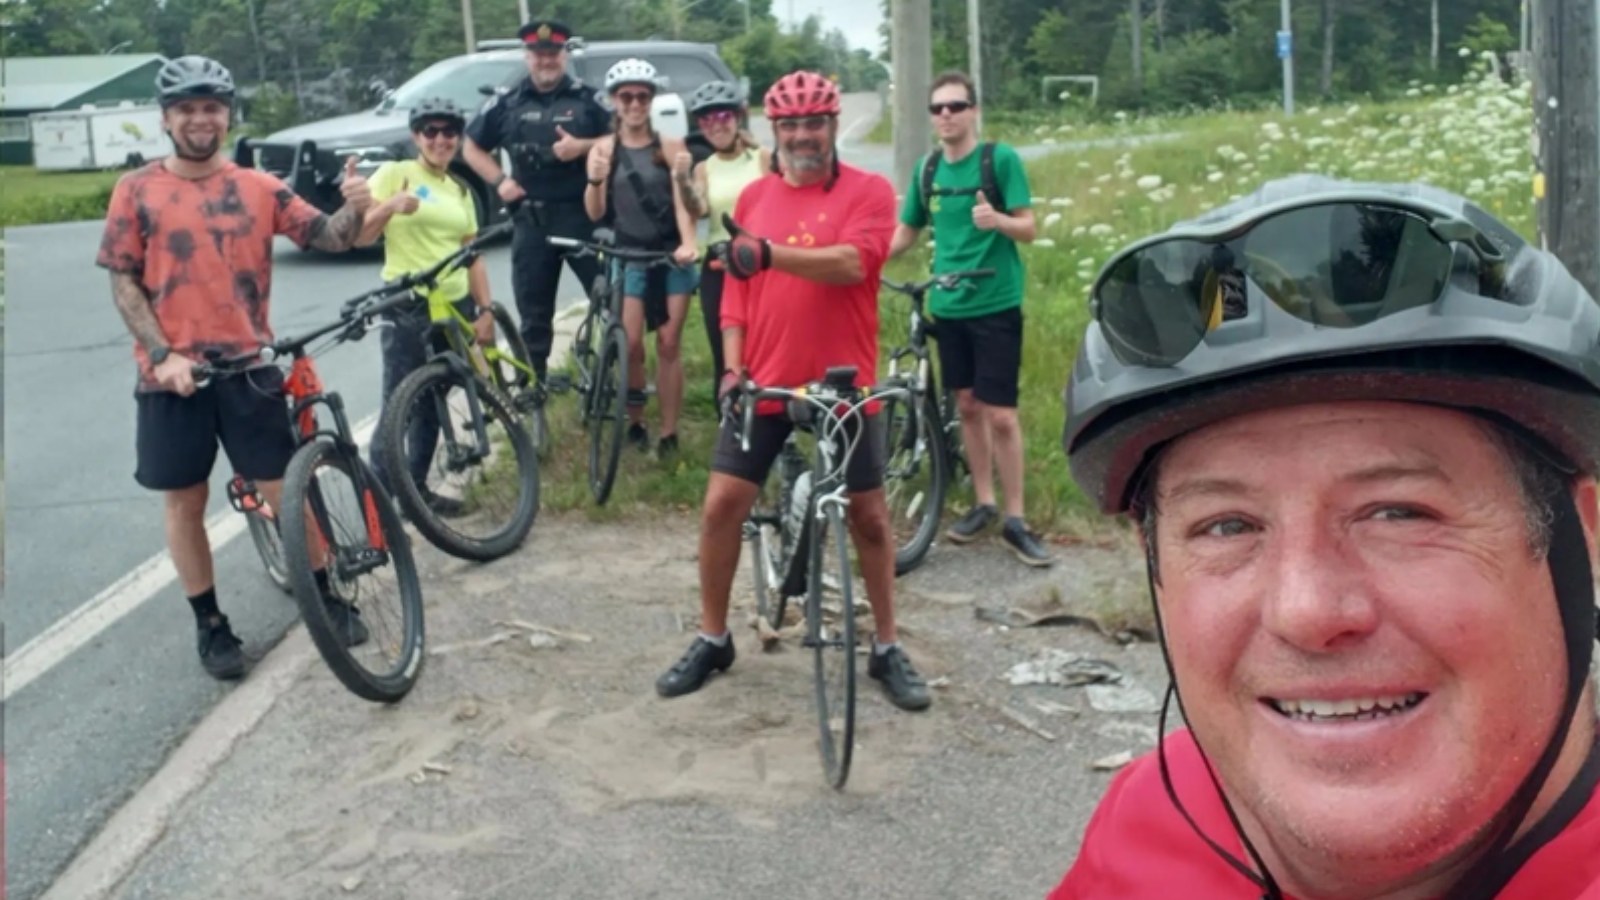 Group of seven cyclists in various outfits with helmets, posing on a roadside; a mix of mountain bikes and road bikes are visible. Lush greenery and wildflowers in the background, with a clear sky. Closest to the foreground, a smiling person with a helmet taking a selfie.